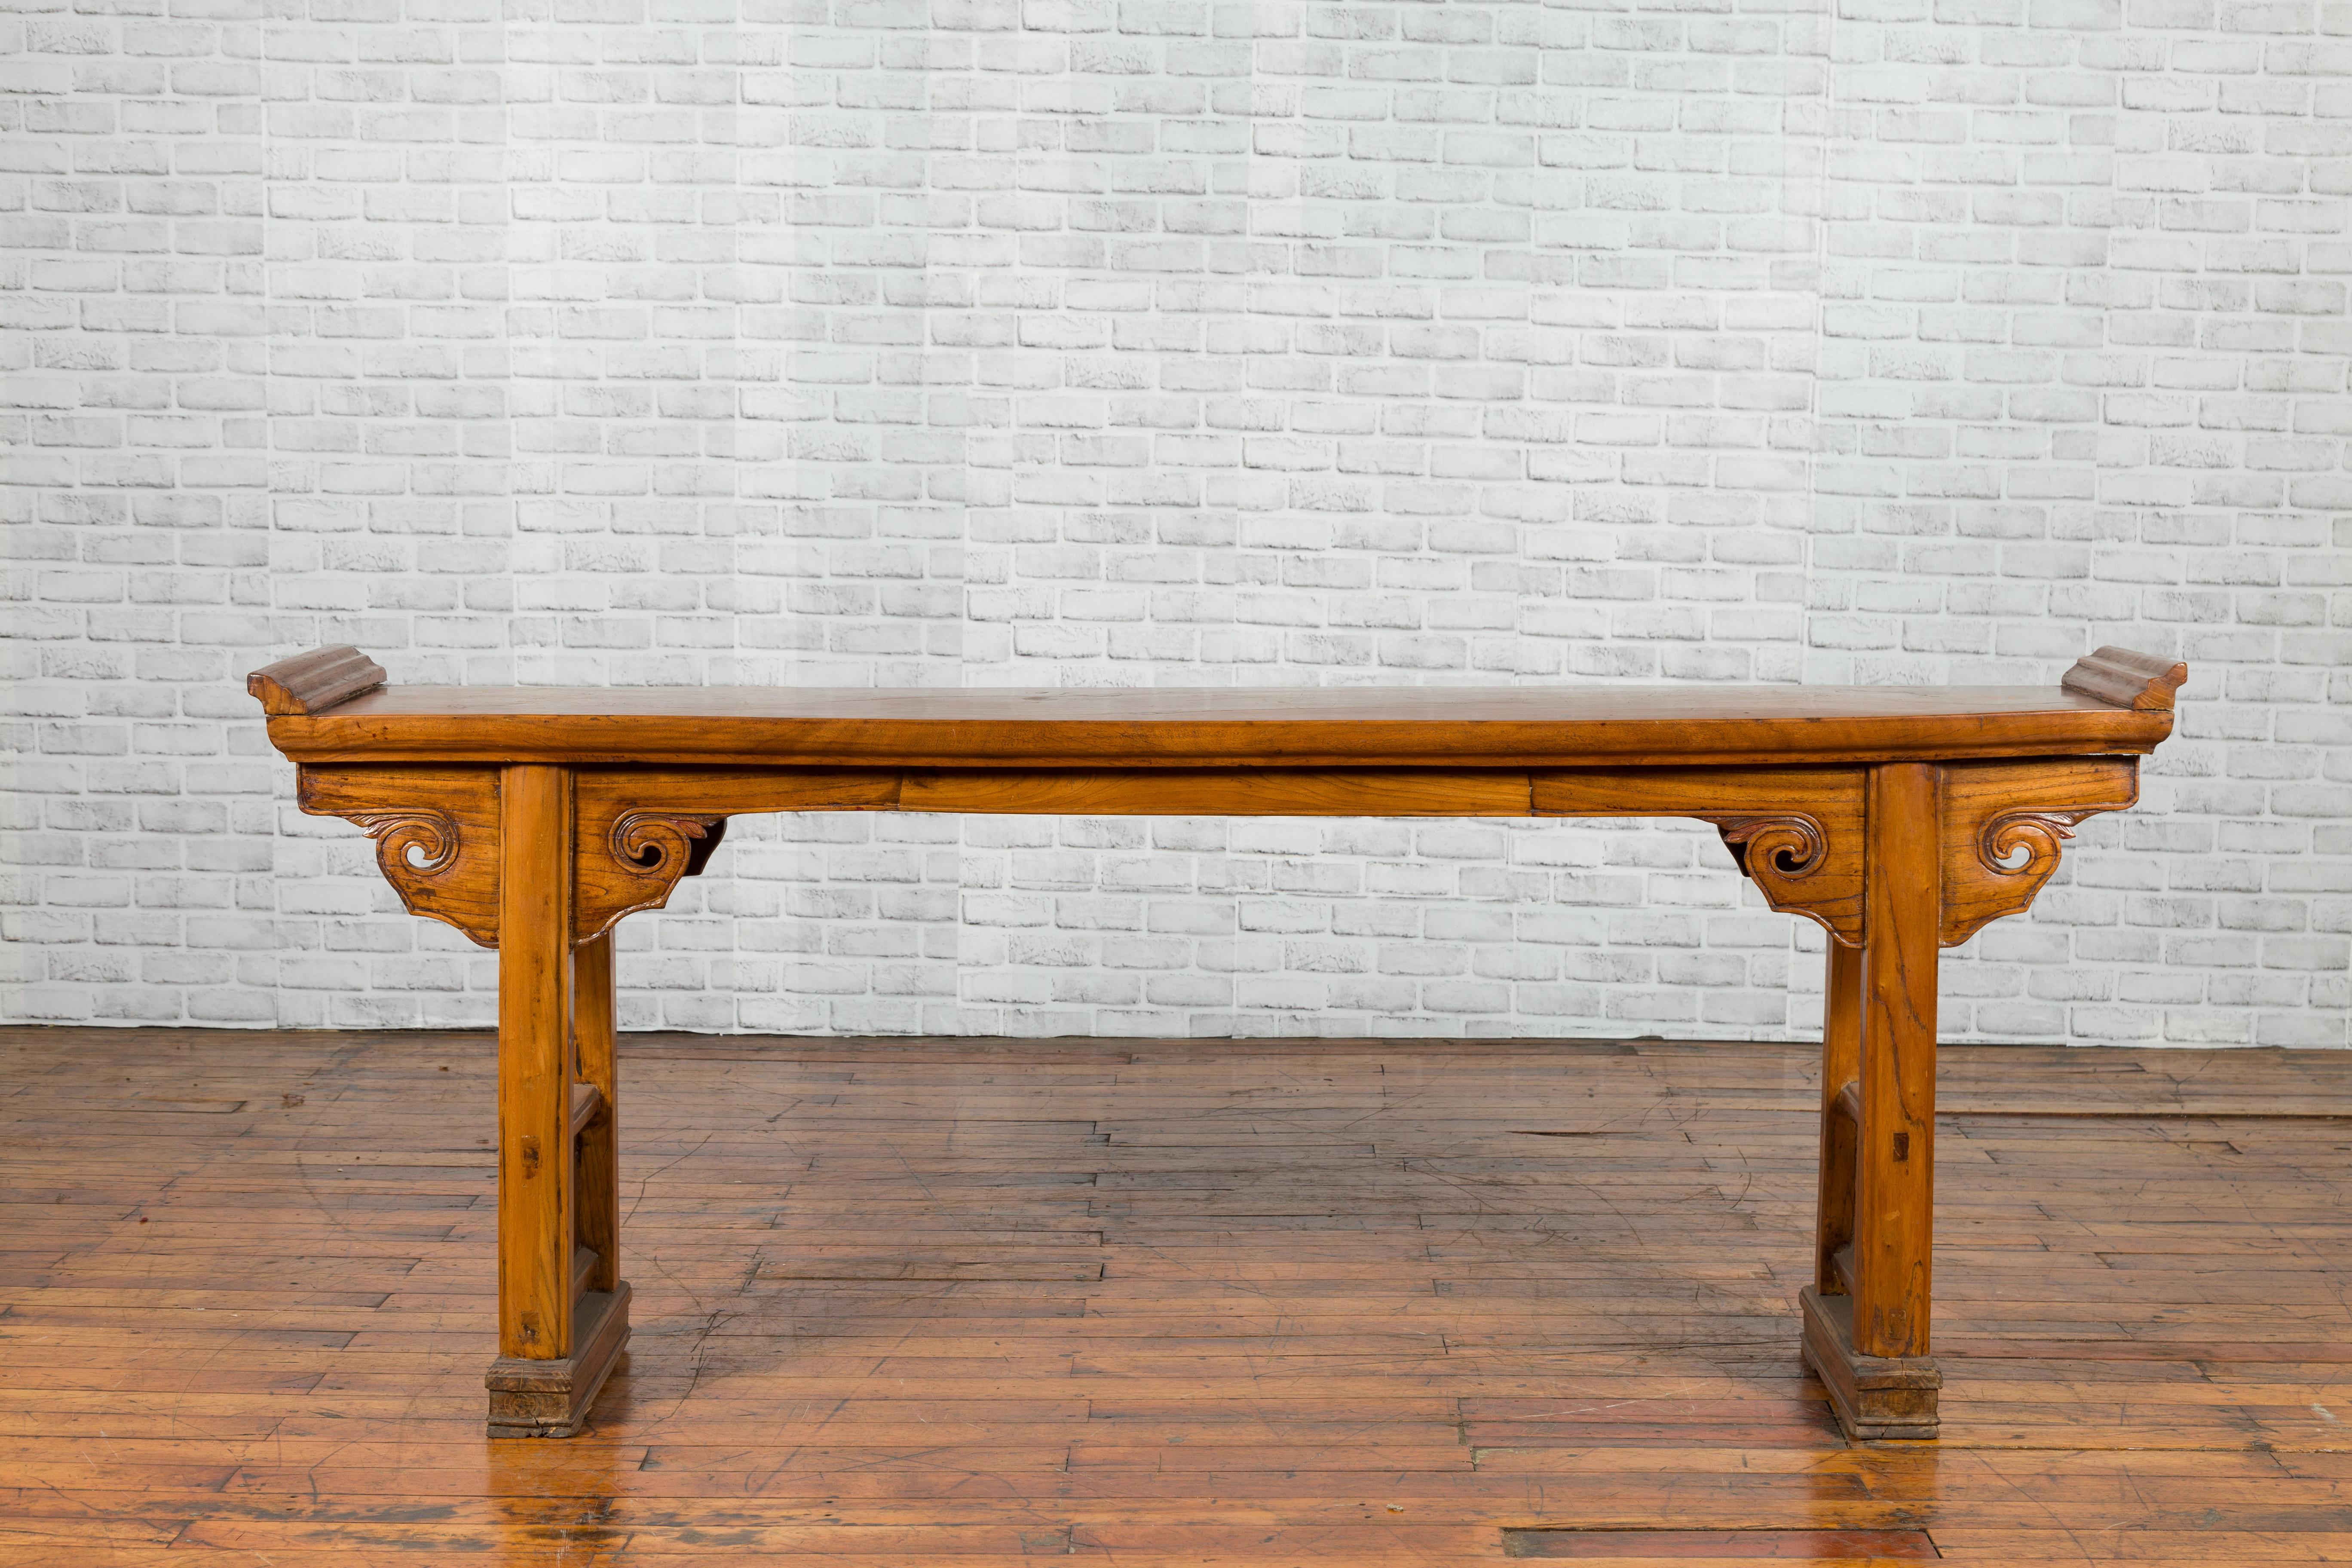 A Chinese Qing dynasty period elm altar console table from the late 19th century, with everted flanges, carved cloud spandrels and pierced motifs. Created in China during the later years of the 19th century, this elm console table features a long